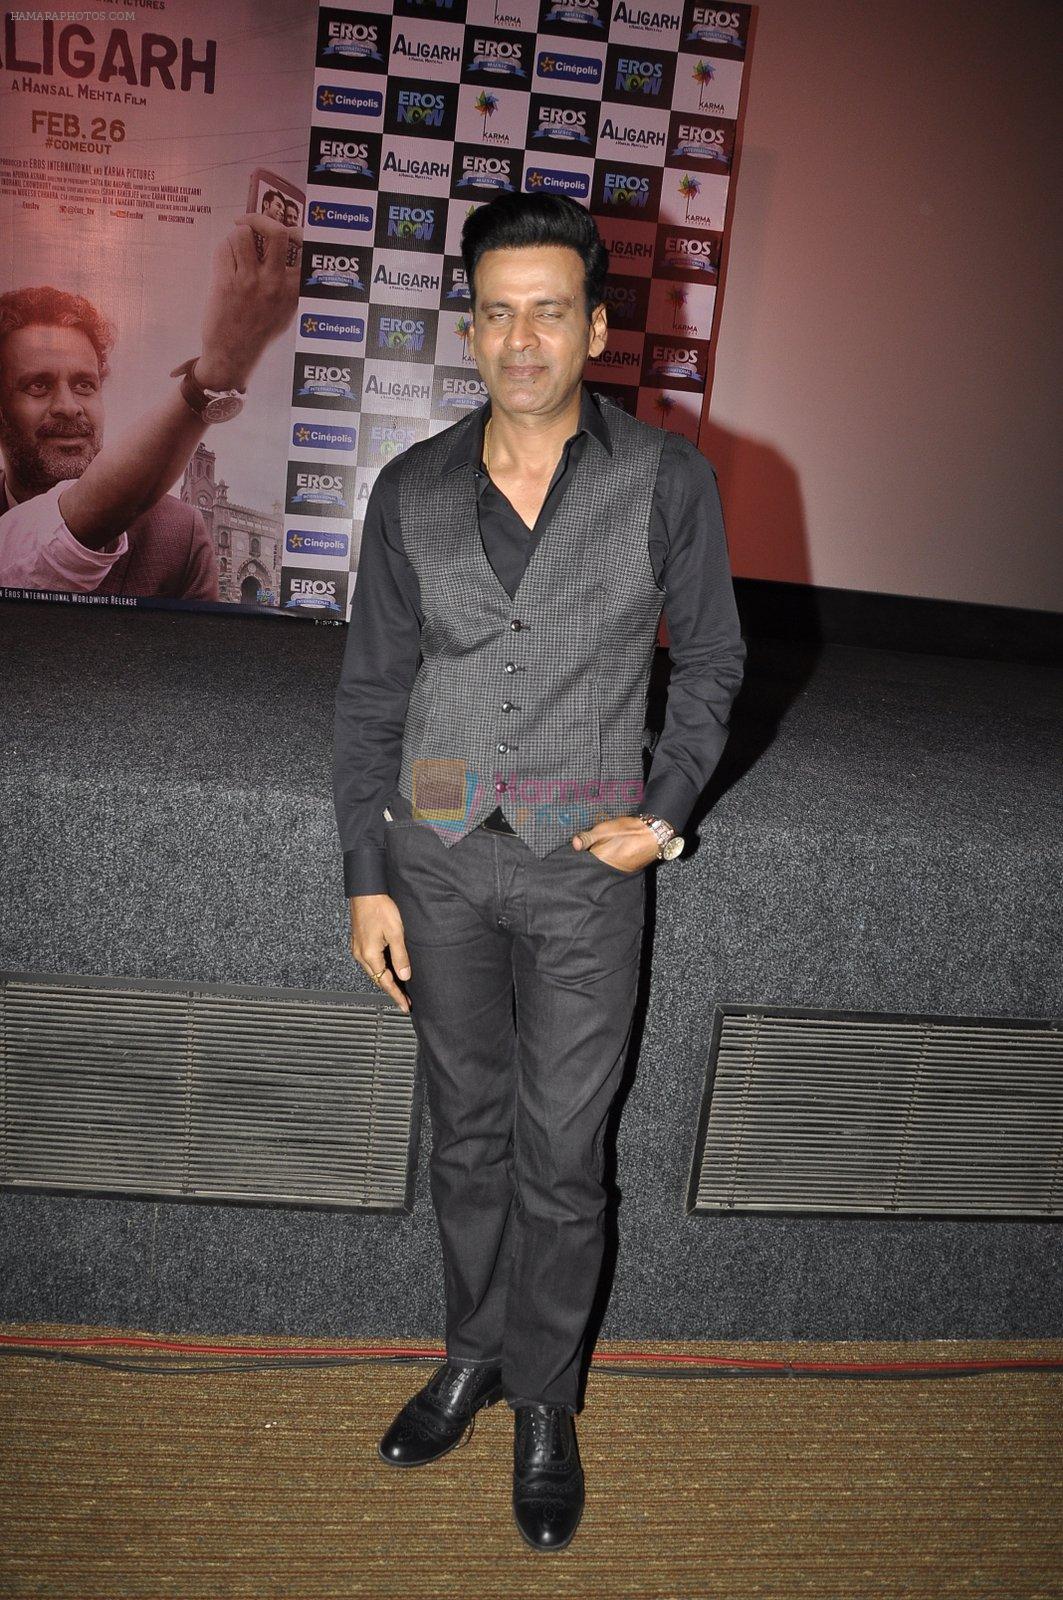 Manoj Bajpai at the launch of film Aligargh on 28th Jan 2016